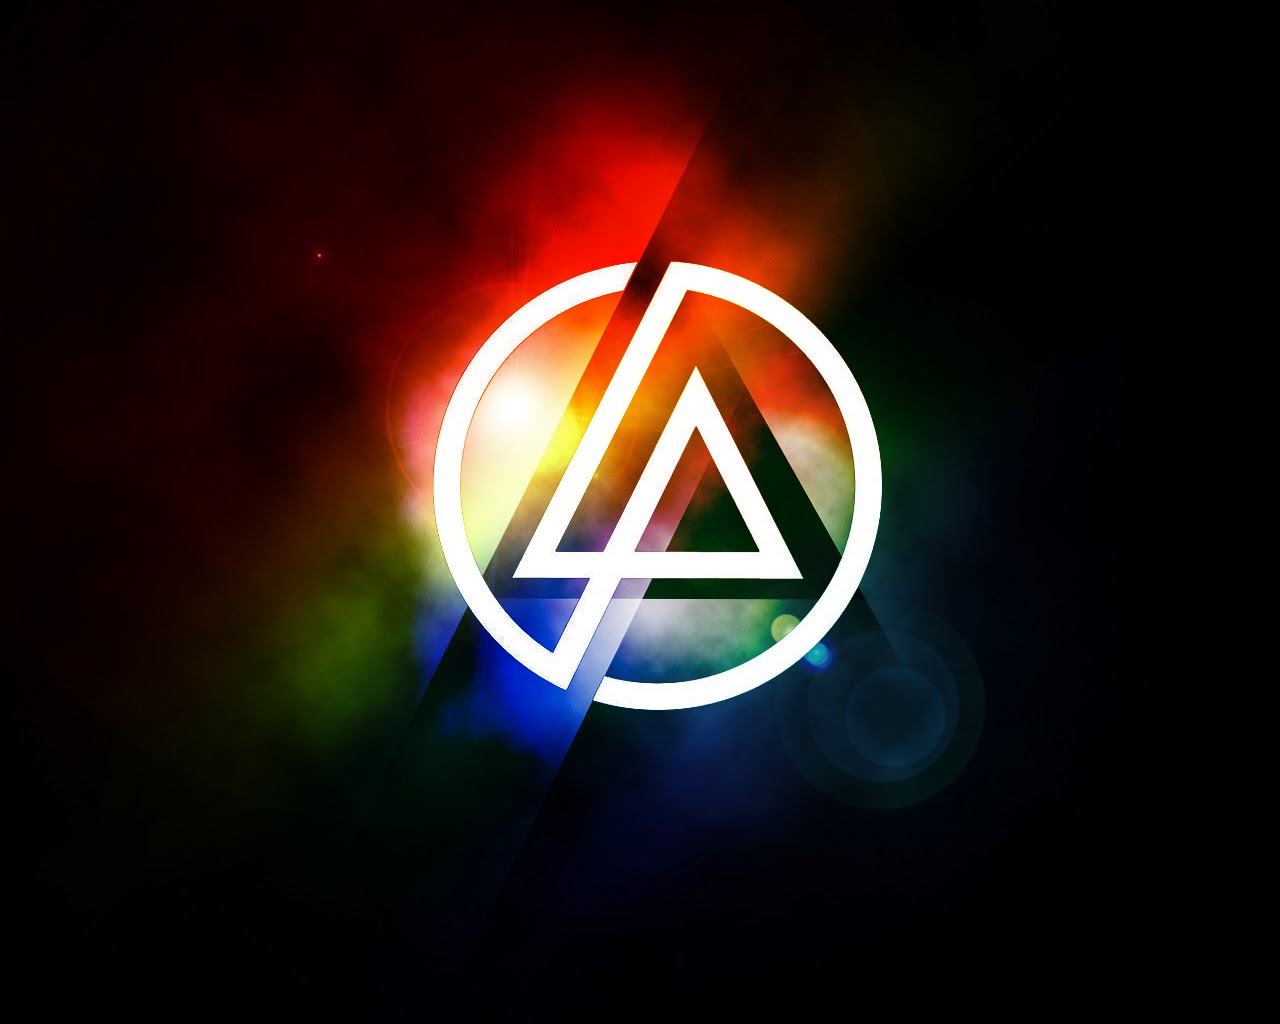 Awesome Linkin Park Logo HD Image For Wallpaper Flash